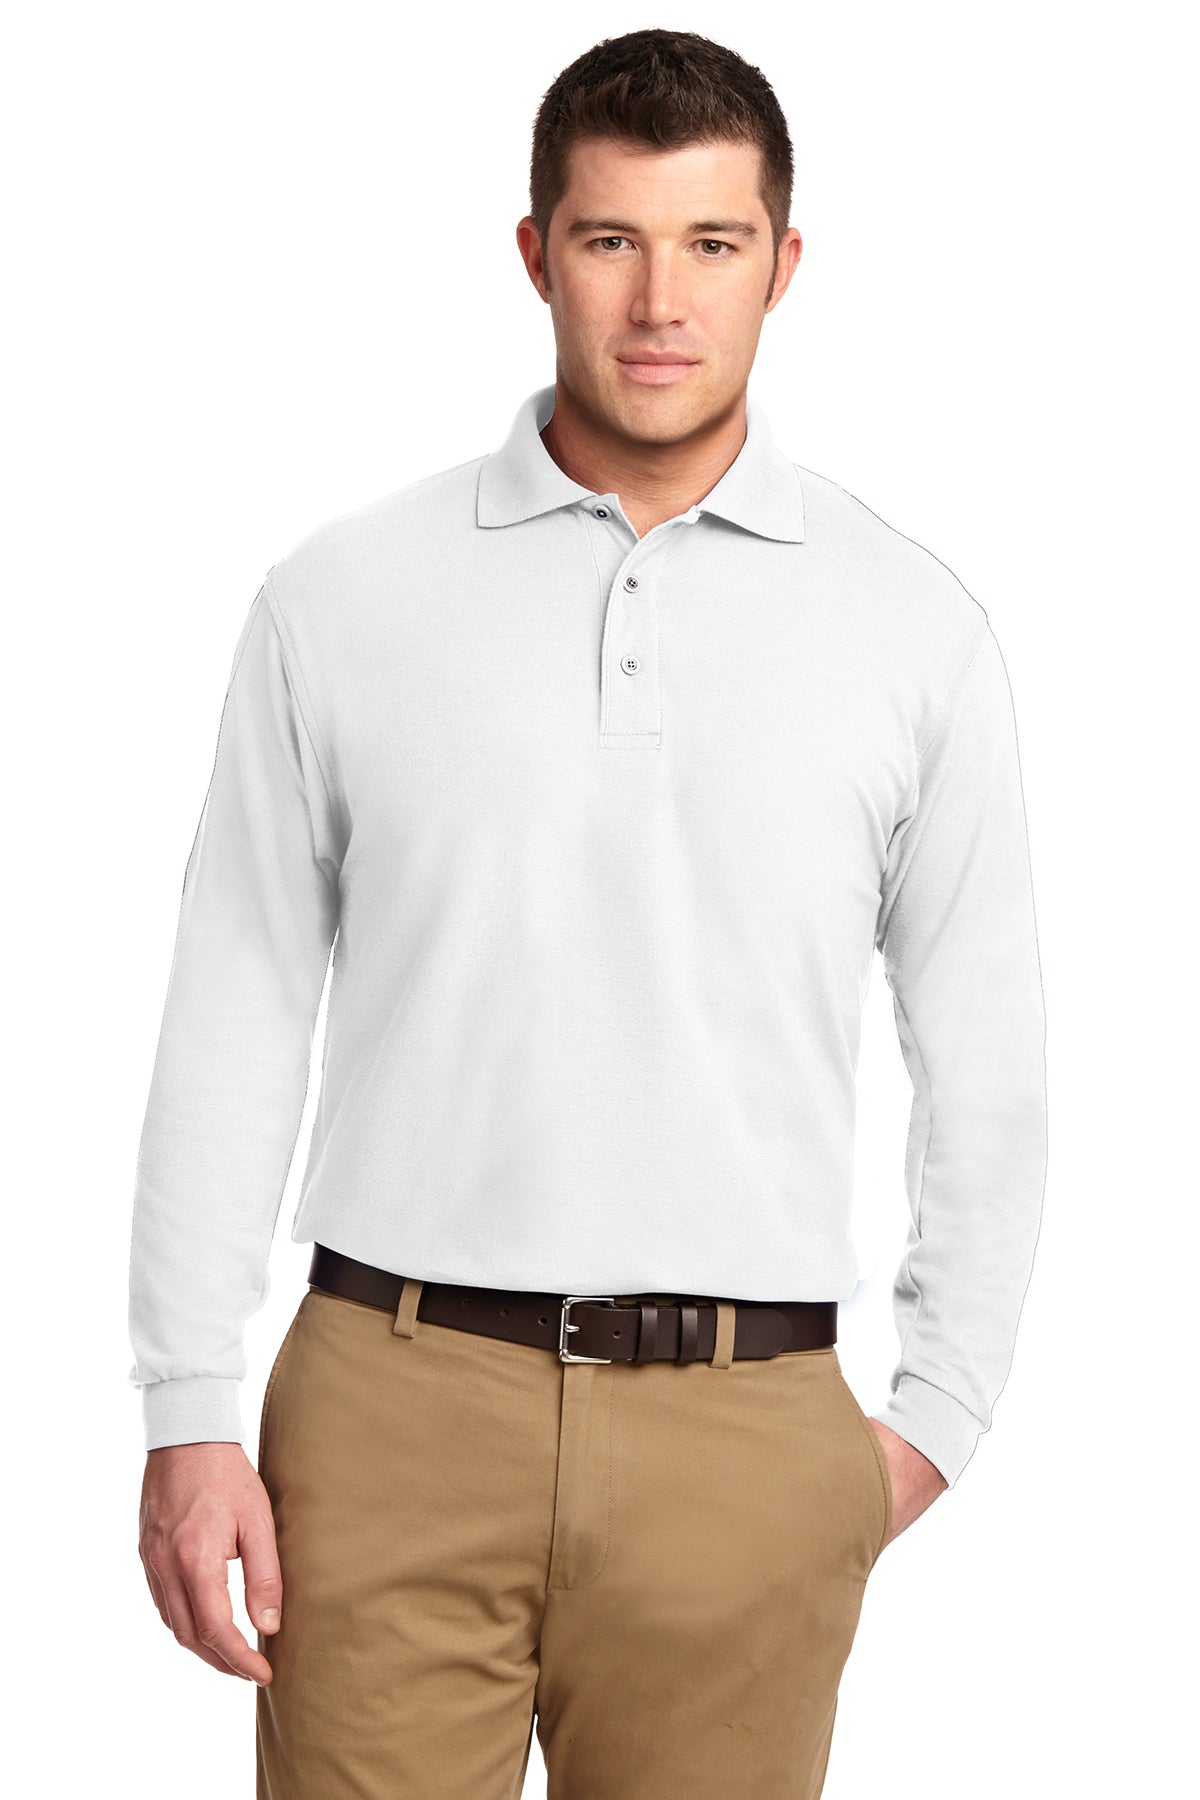 Windsor - ADULT Long Sleeve Polo - WHITE (K500LS) - Southern Grace Creations